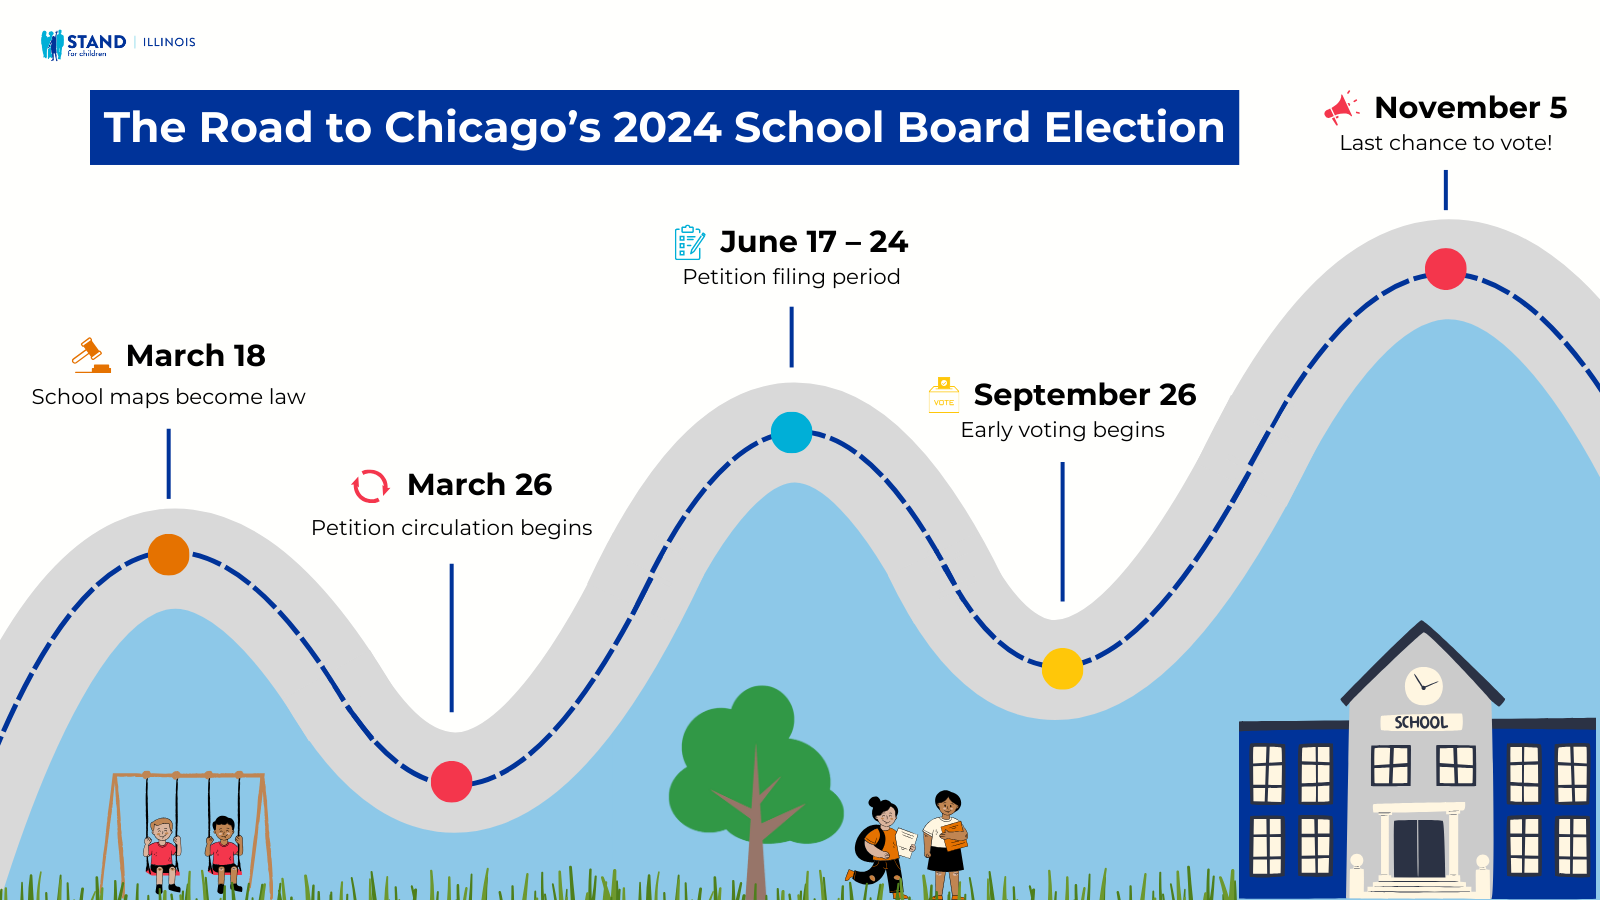 The Road to Chicago's 2024 School Board Election. March 18: School maps become law. March 26: Petition circulation begins June 17 – 24: Petition filing period September 26: Early voting begins November 5: Last chance to vote!